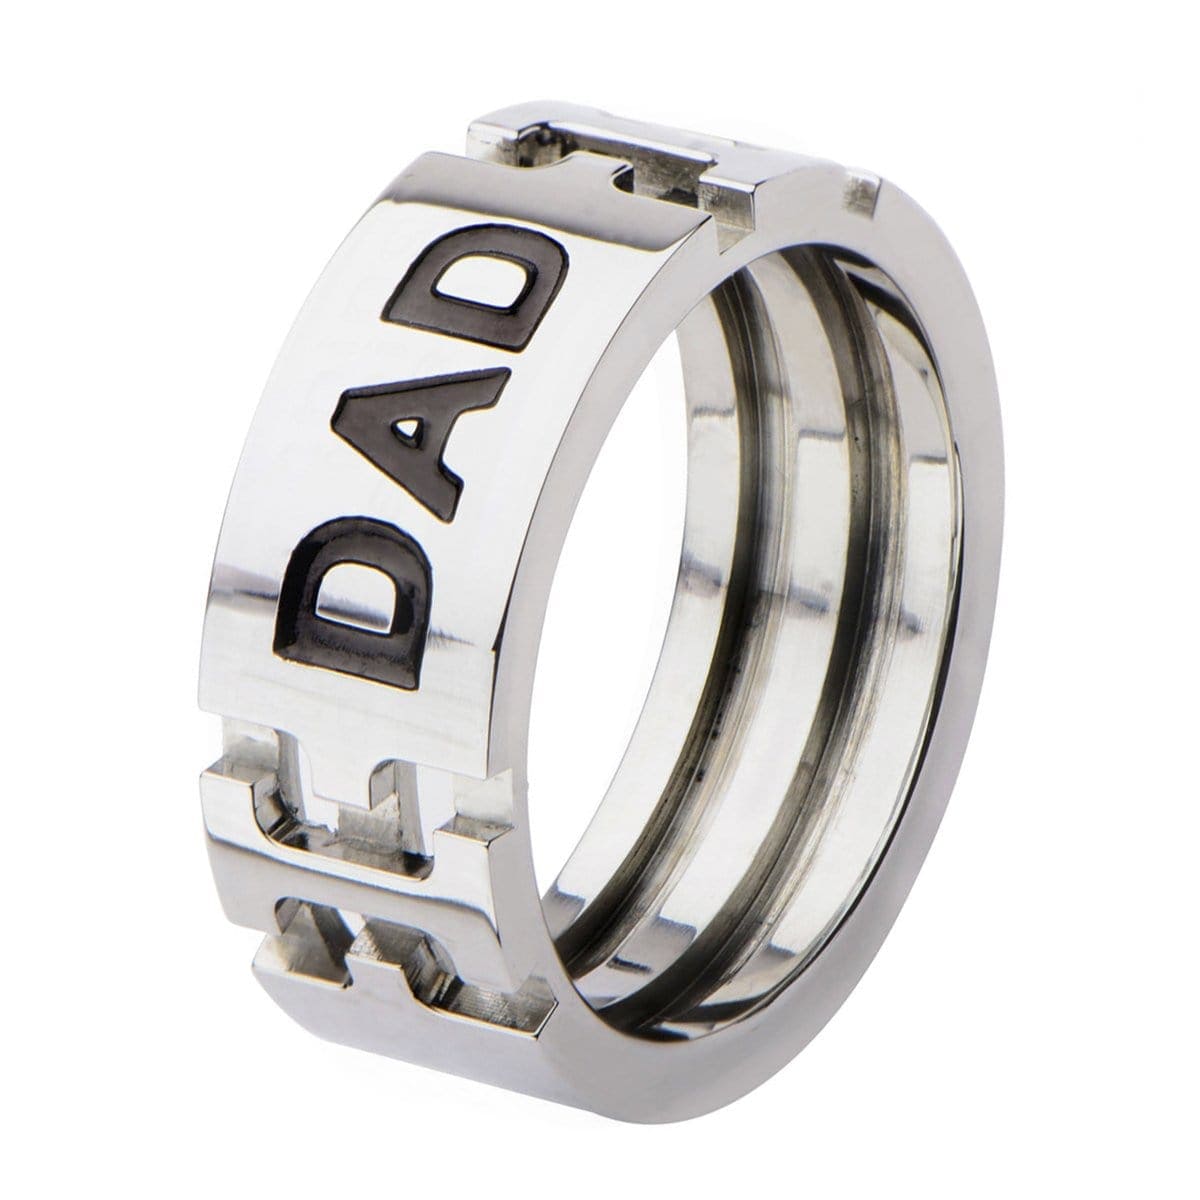 INOX JEWELRY Rings Black and Silver Tone Stainless Steel Engraved DAD Band Ring